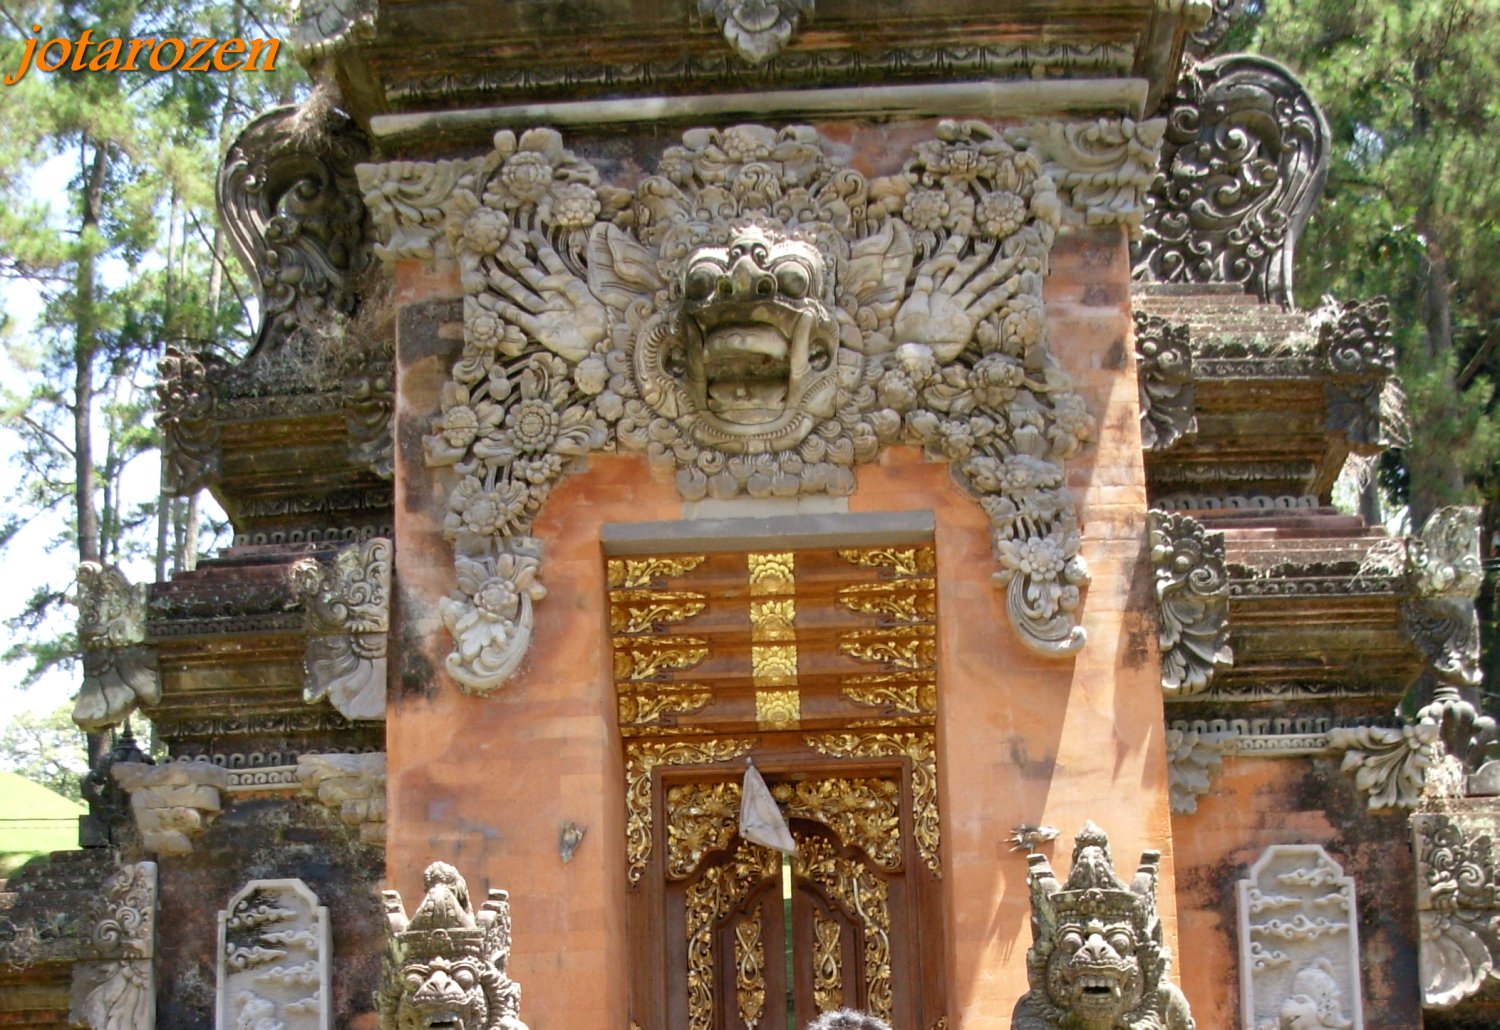 Footsteps - Jotaro's Travels: Indonesia - Bali Hai : Day 2 & 3 Sept 2007